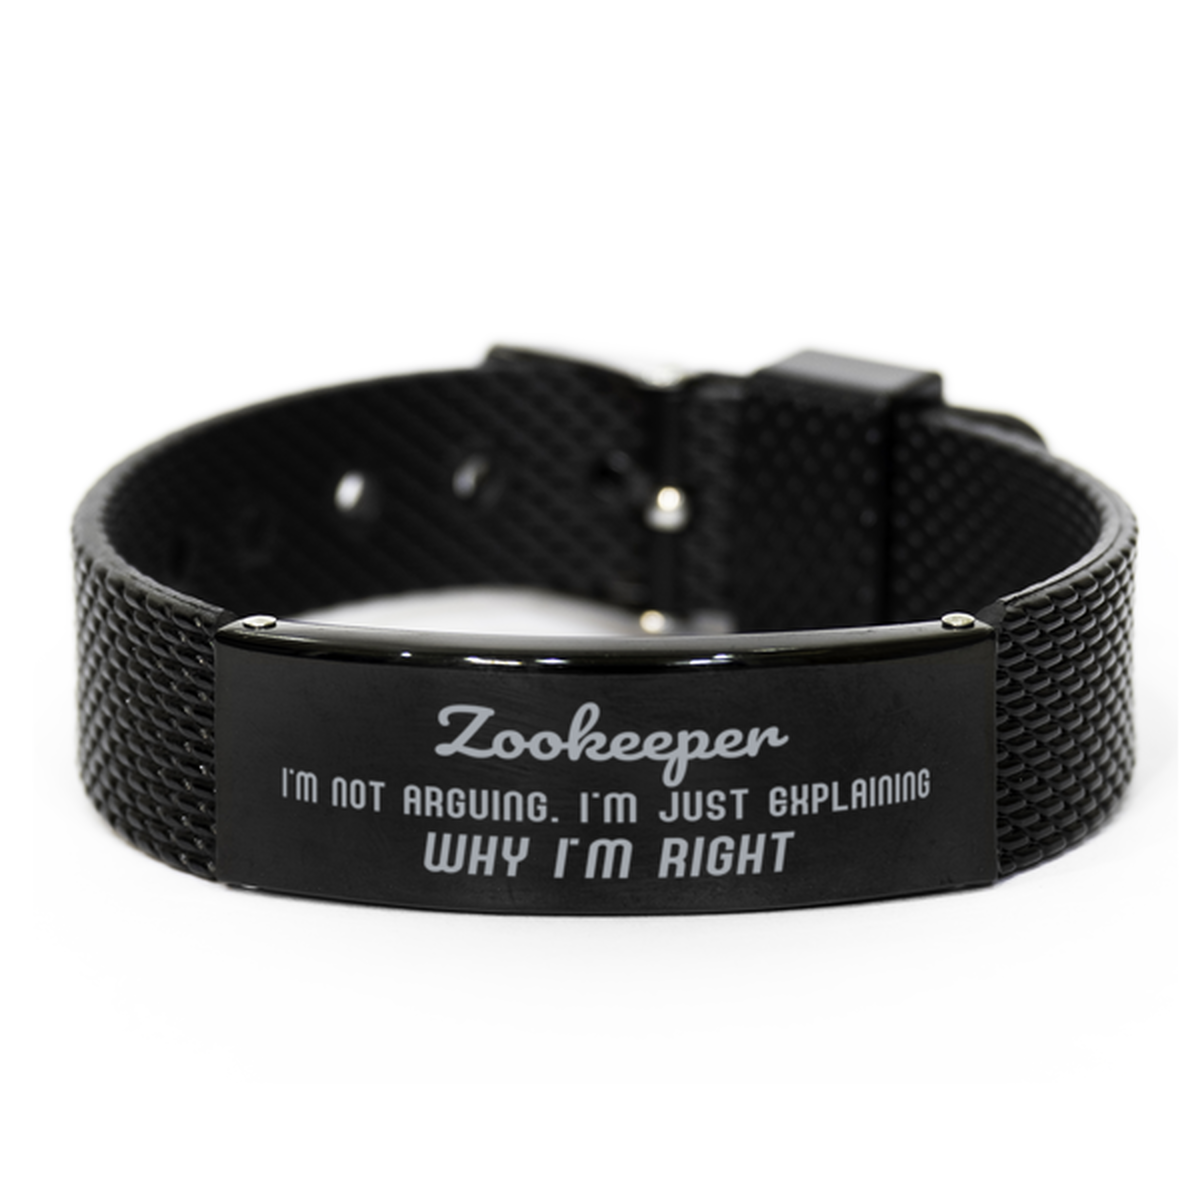 Zookeeper I'm not Arguing. I'm Just Explaining Why I'm RIGHT Black Shark Mesh Bracelet, Funny Saying Quote Zookeeper Gifts For Zookeeper Graduation Birthday Christmas Gifts for Men Women Coworker